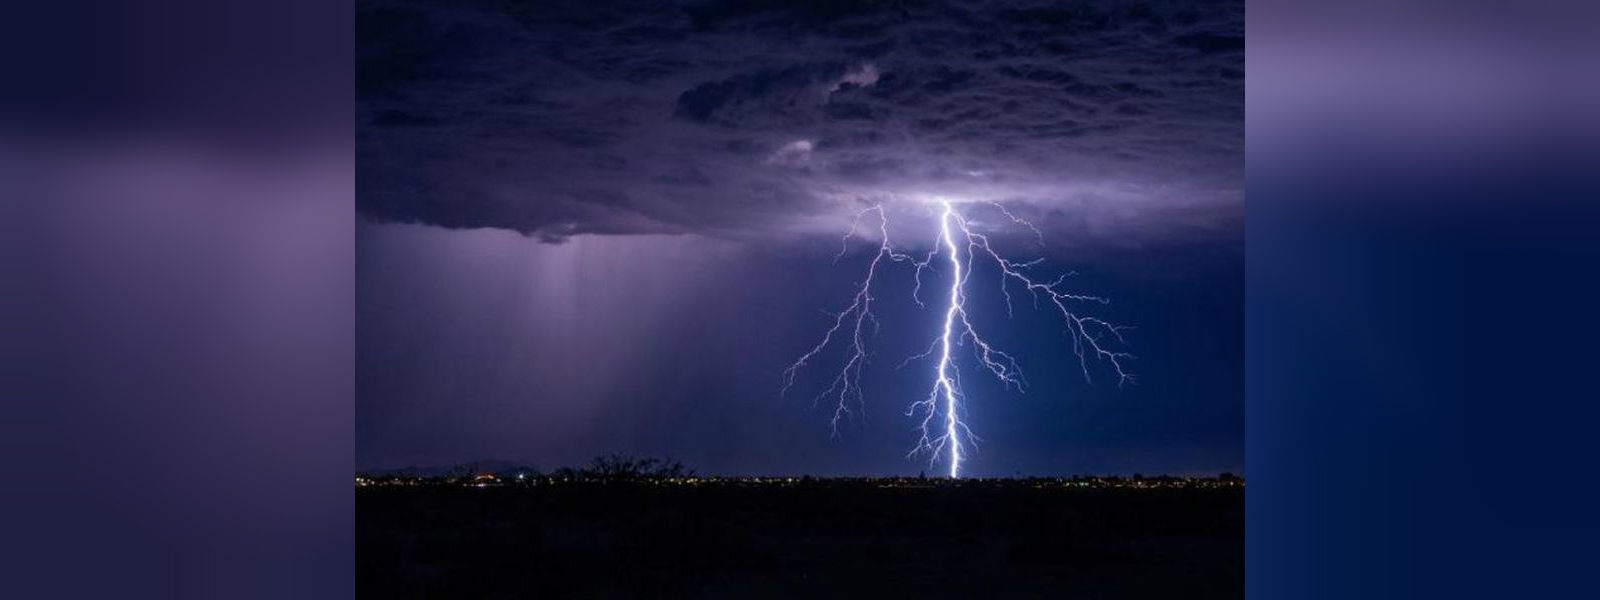 Lightning claims 04 lives in 24-hours: Police